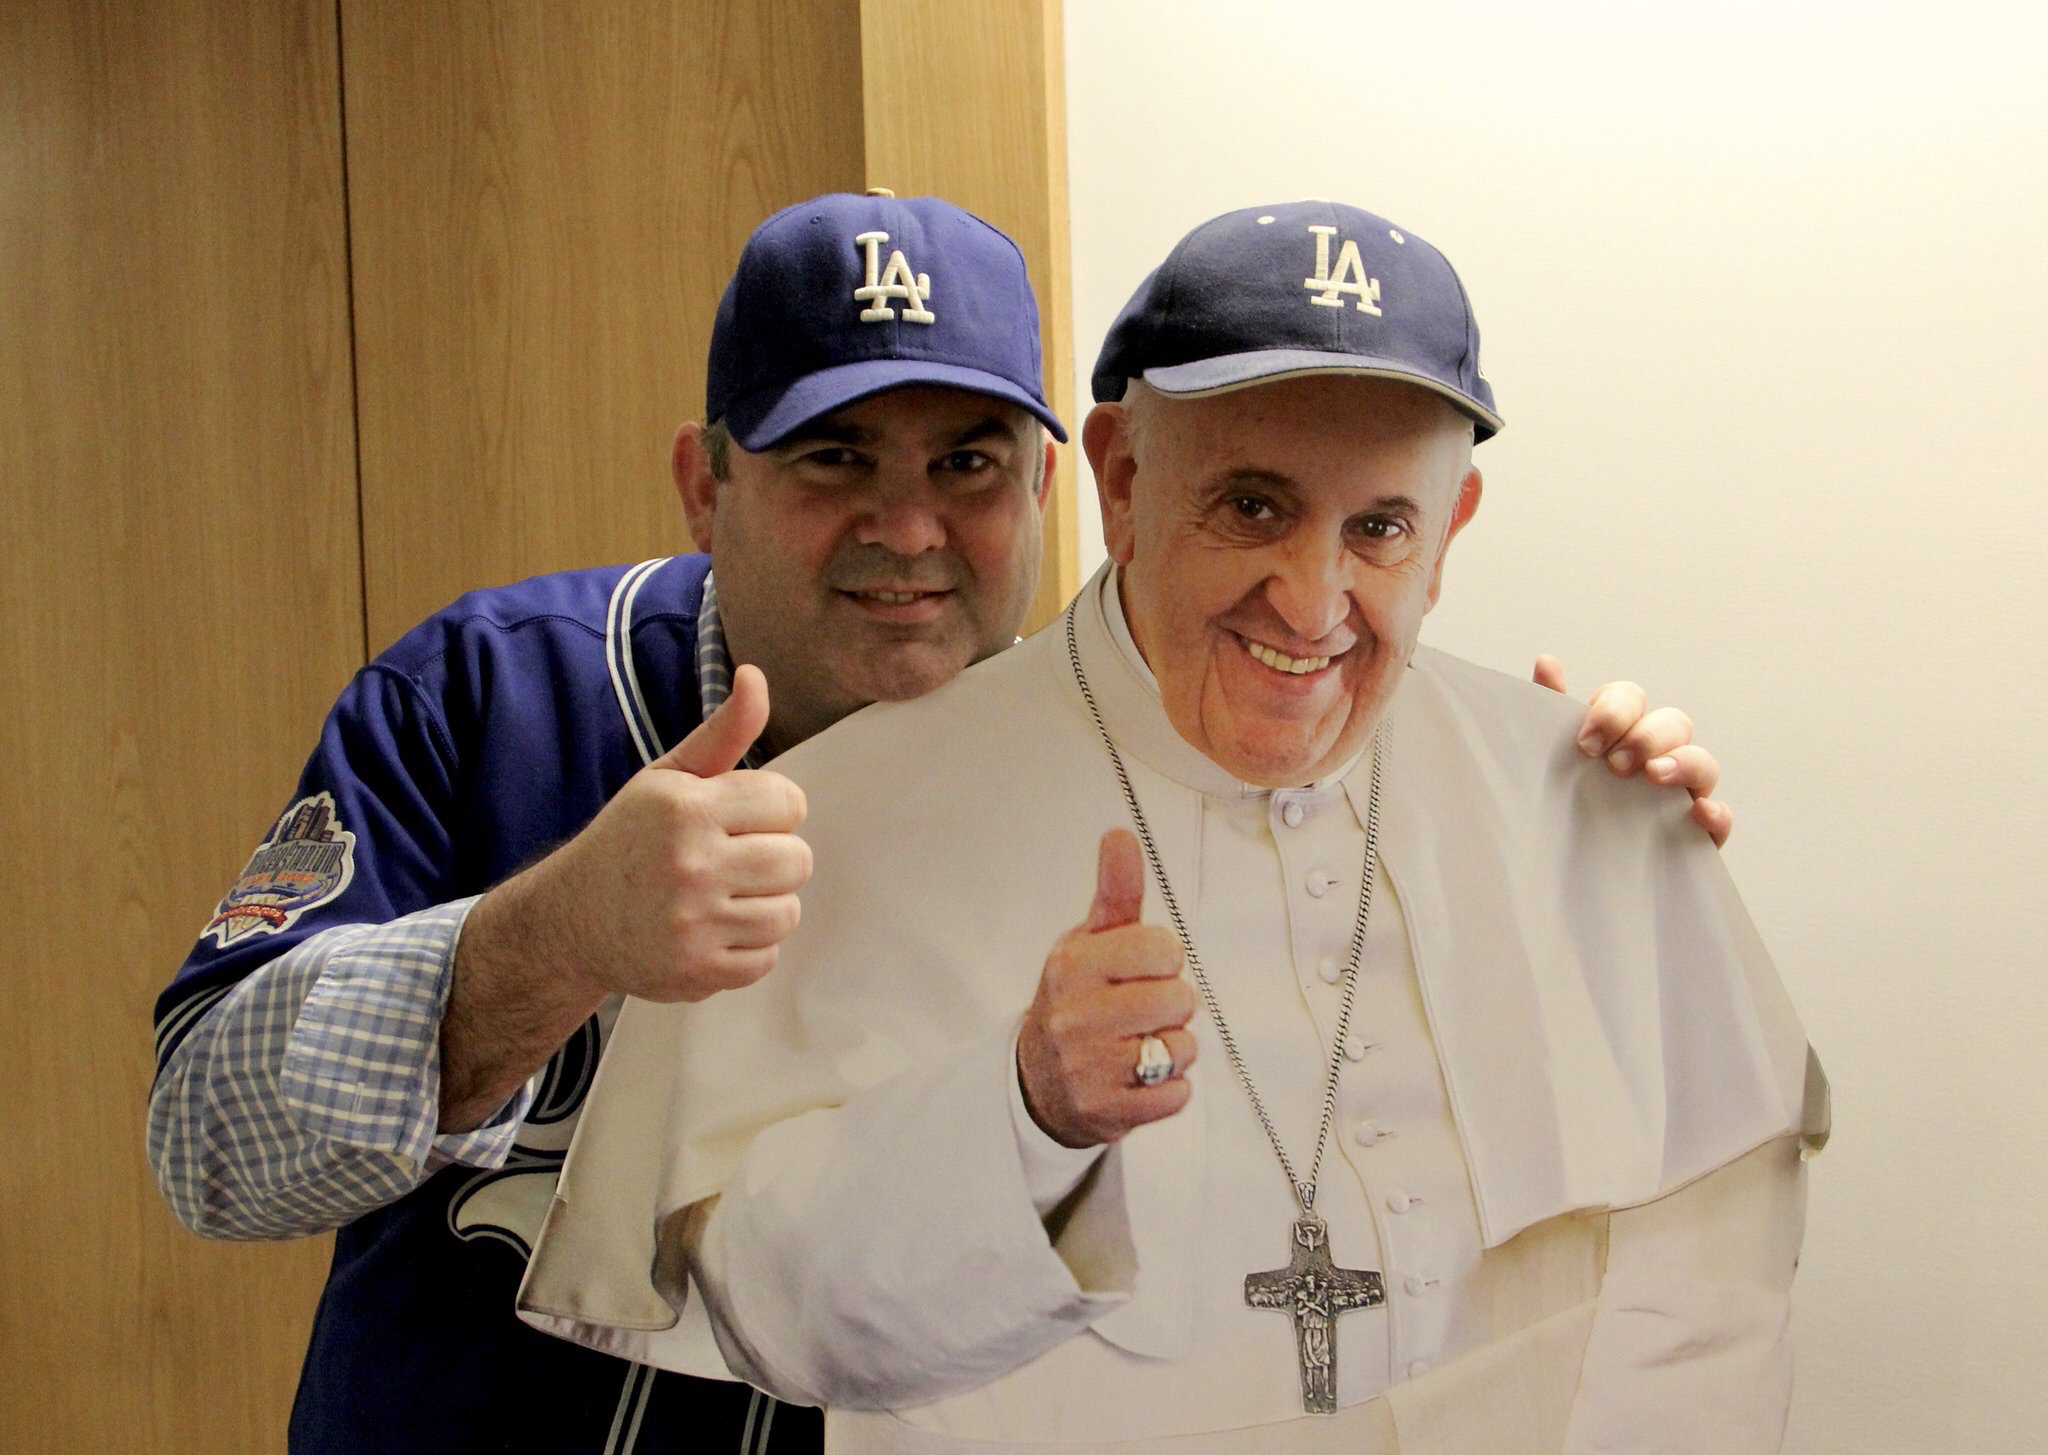 Jim Keane and Pope Francis, the Dodgers 'biggest fans